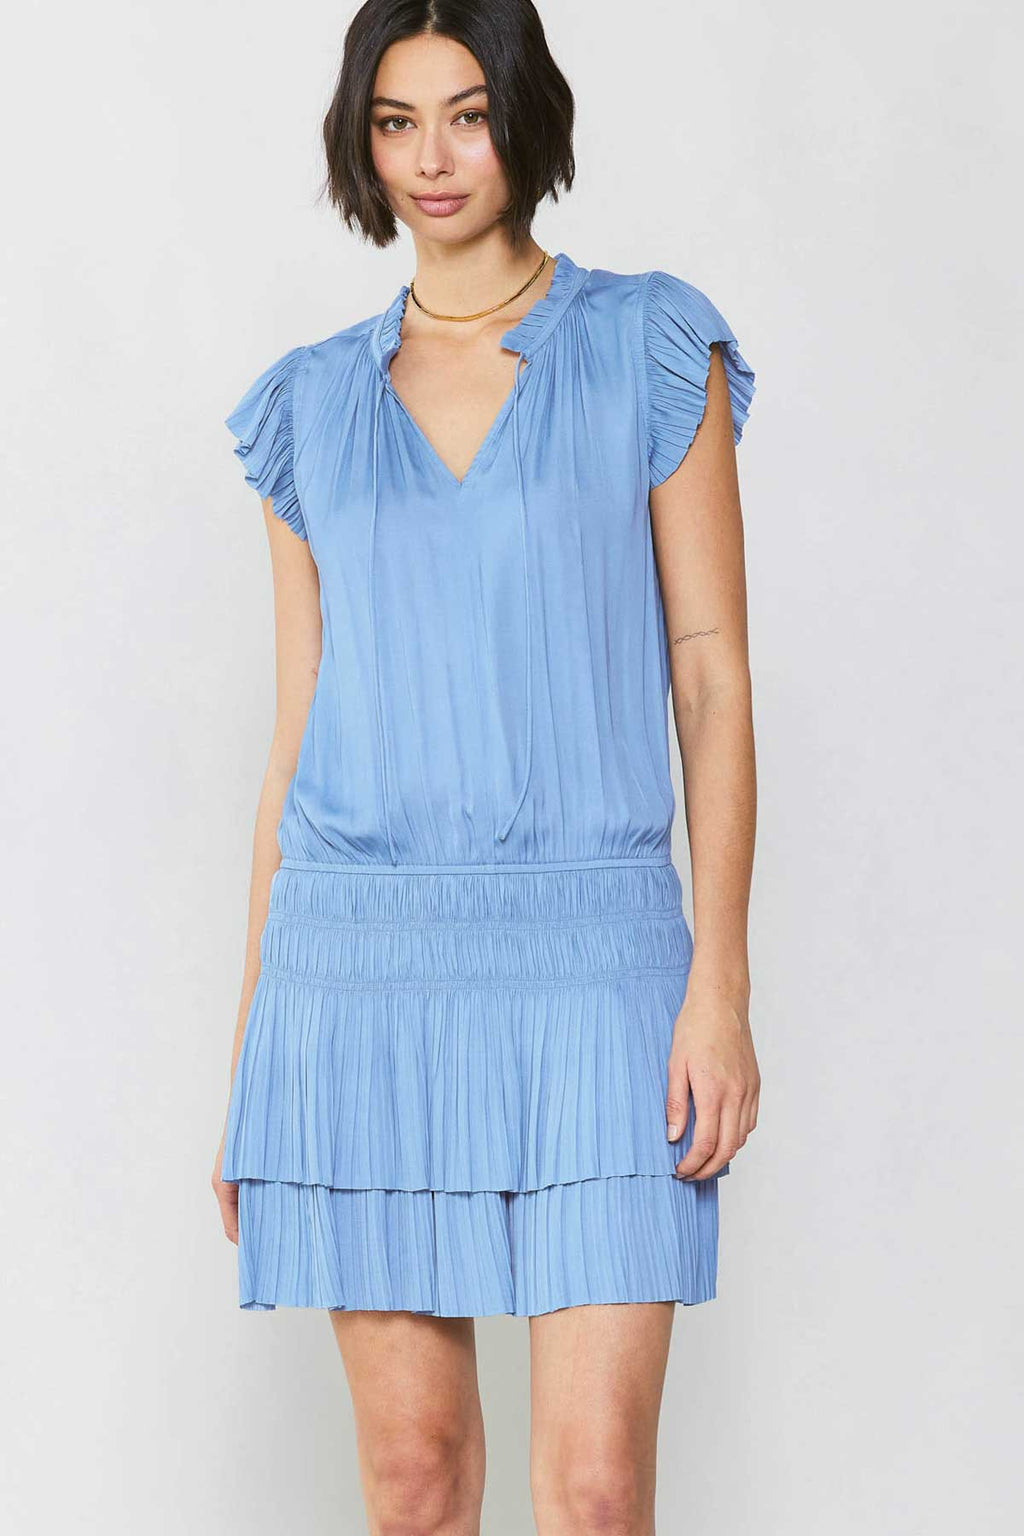 Newport Coast Mini Dress with Pleated Skirt in Periwinkle